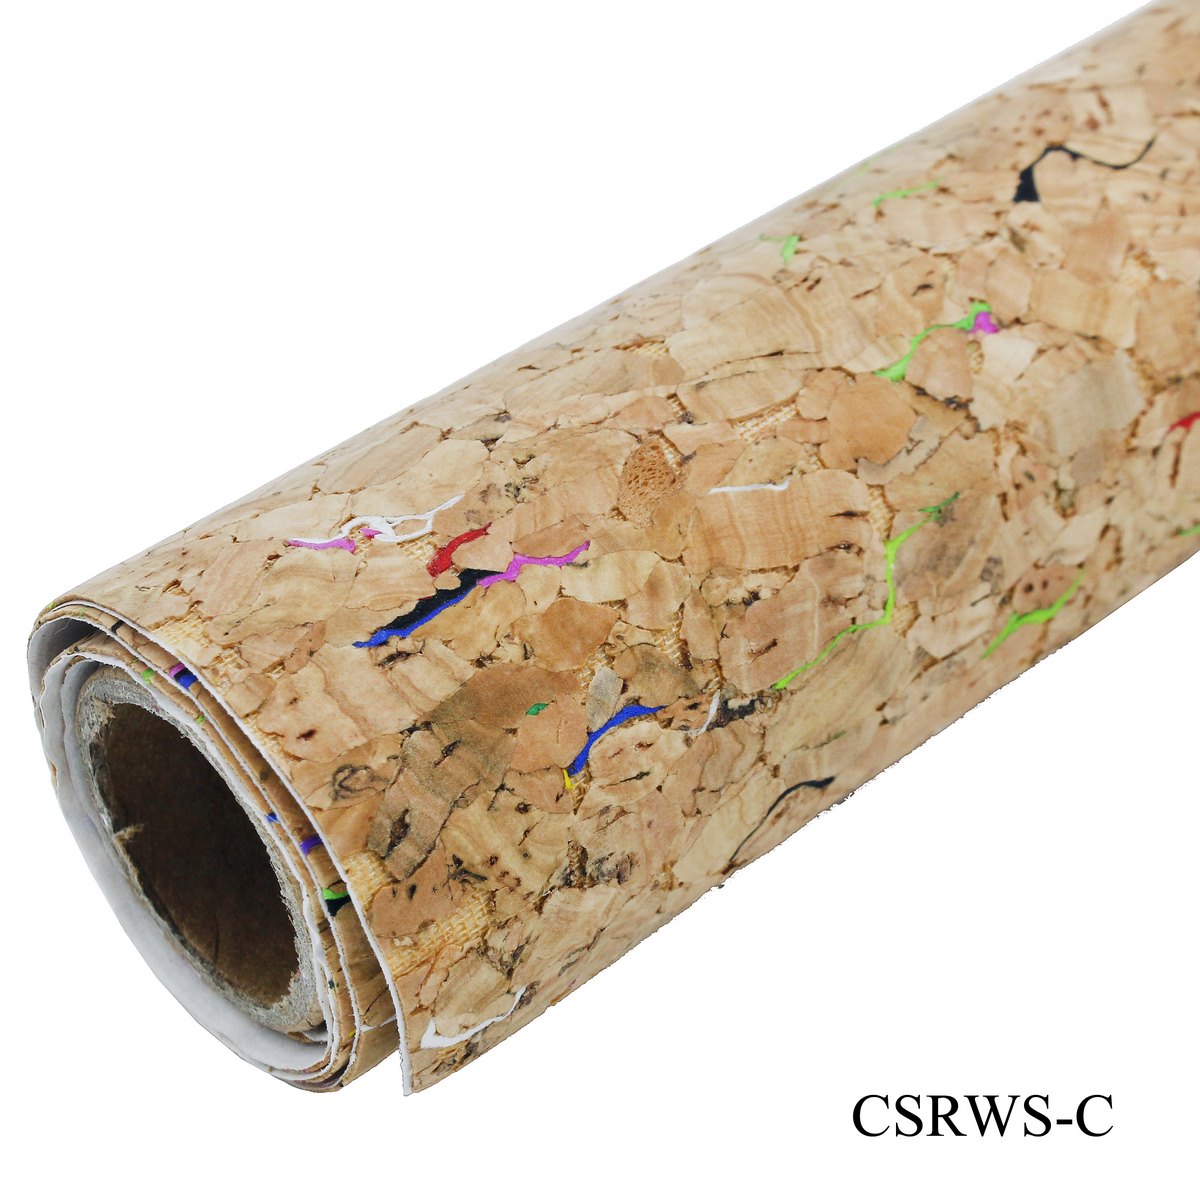 jags-mumbai Cork Sheet Cork Sheet Roll With Sticker 15X18 Inch CSRWS-C - Self-Adhesive Cork for Crafting and Home Projects